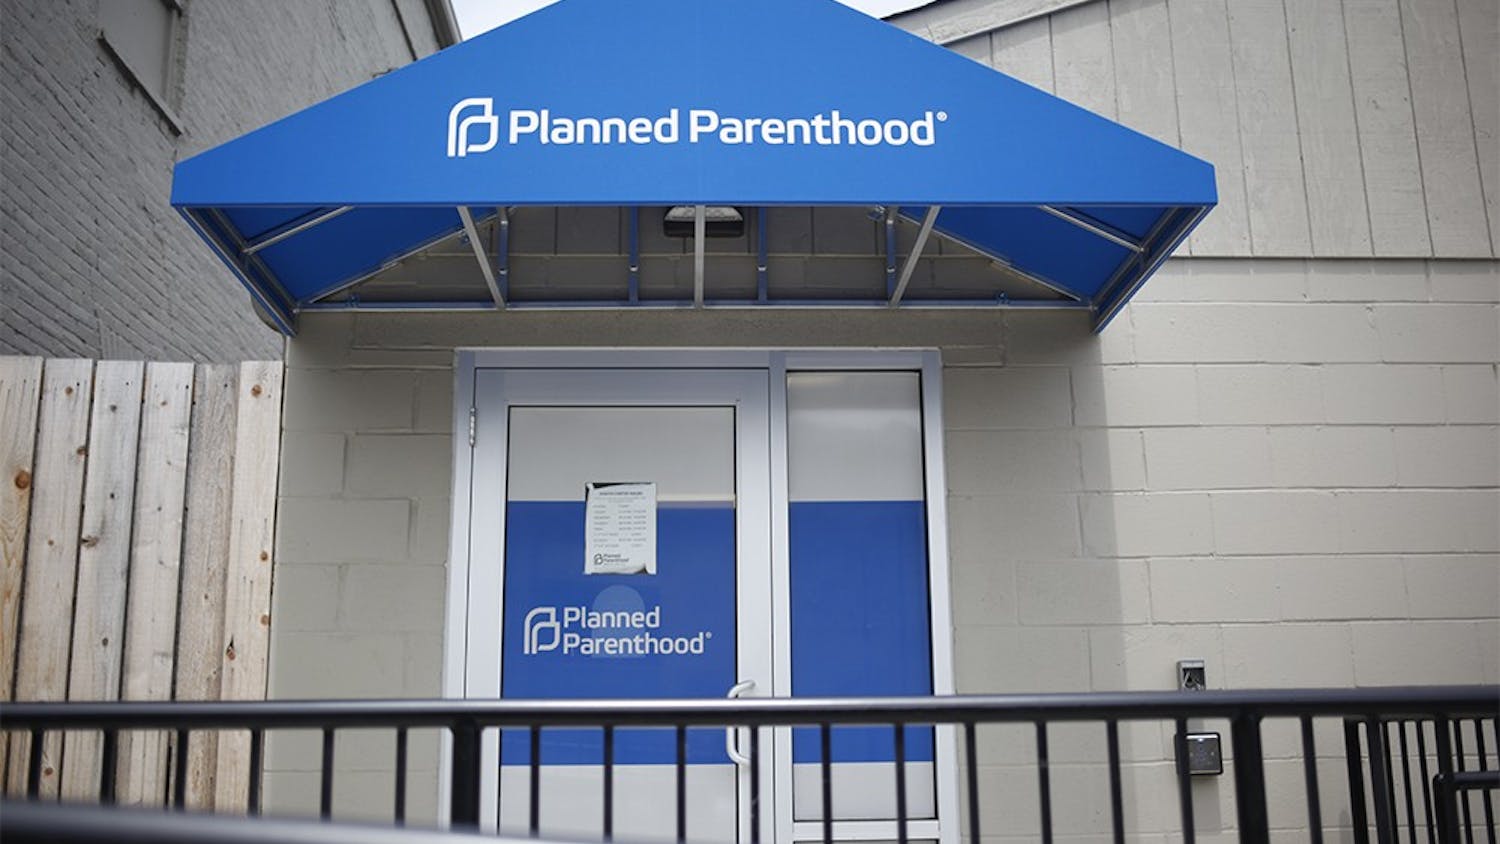 Bloomington's Planned Parenthood, located on S. College Ave, is the only facility in the state that uses volunteer escorts to accompany clients to the clinic's door.